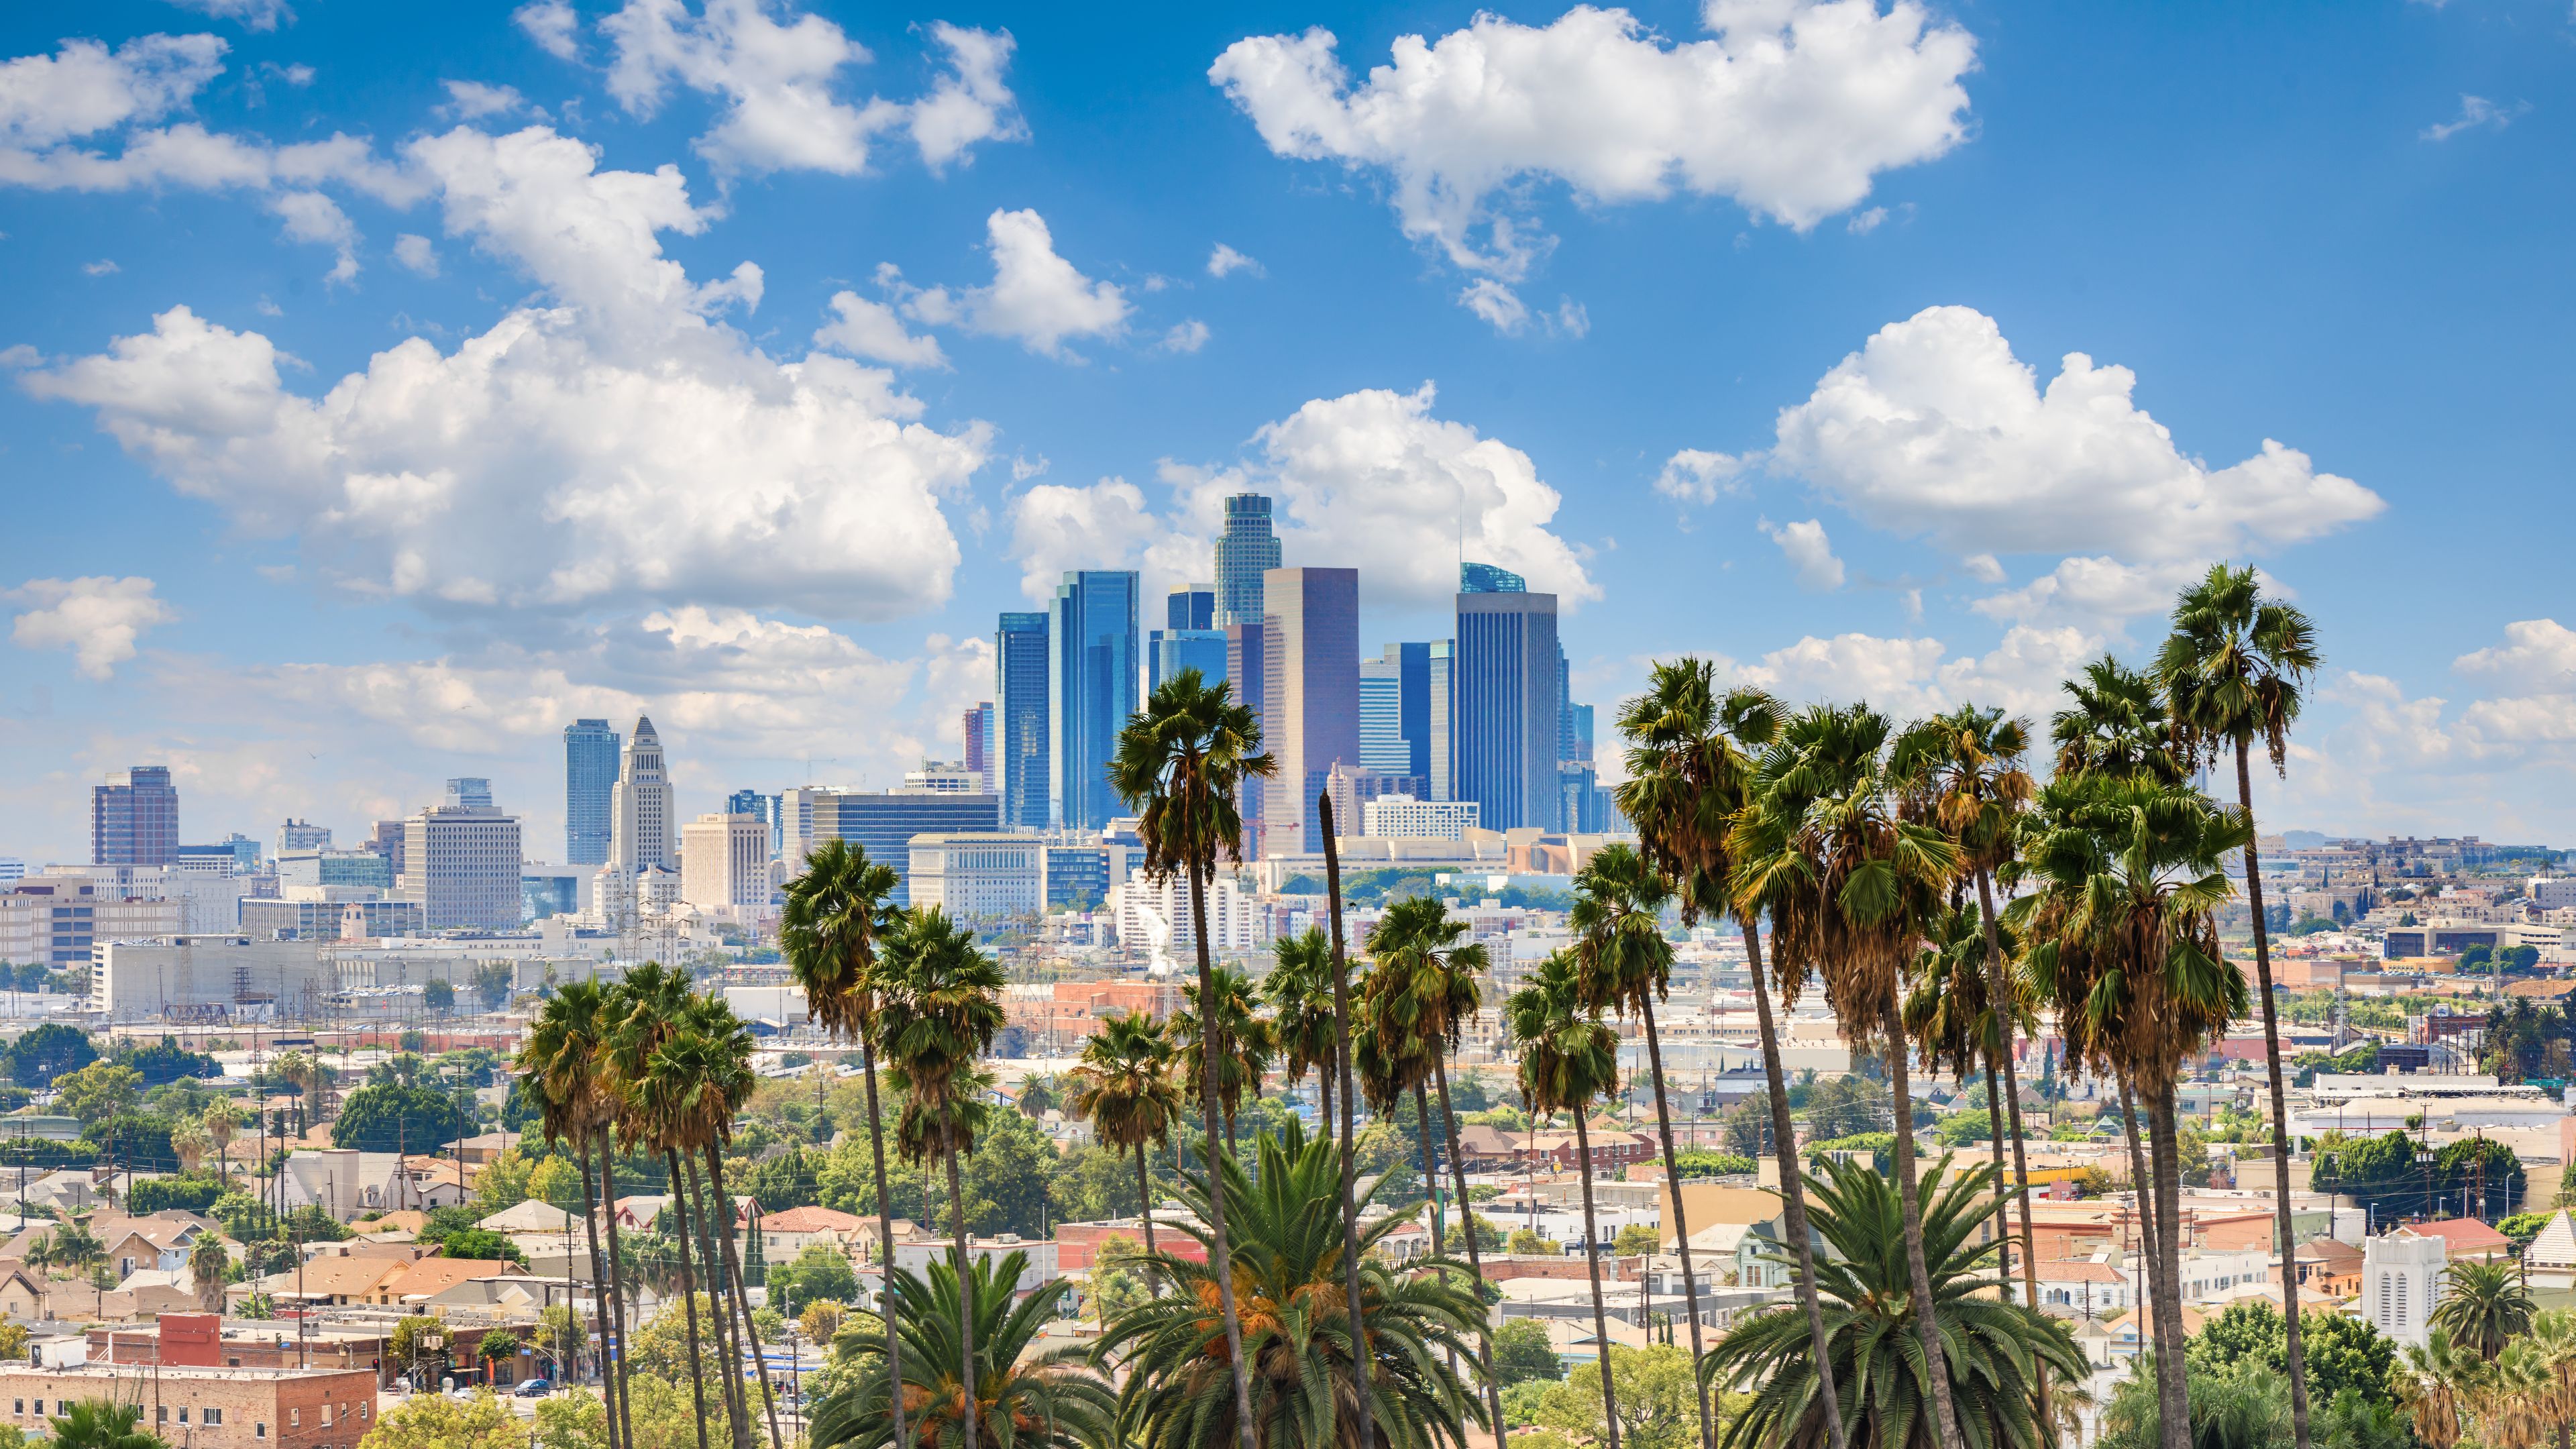 About Los Angeles - Guides